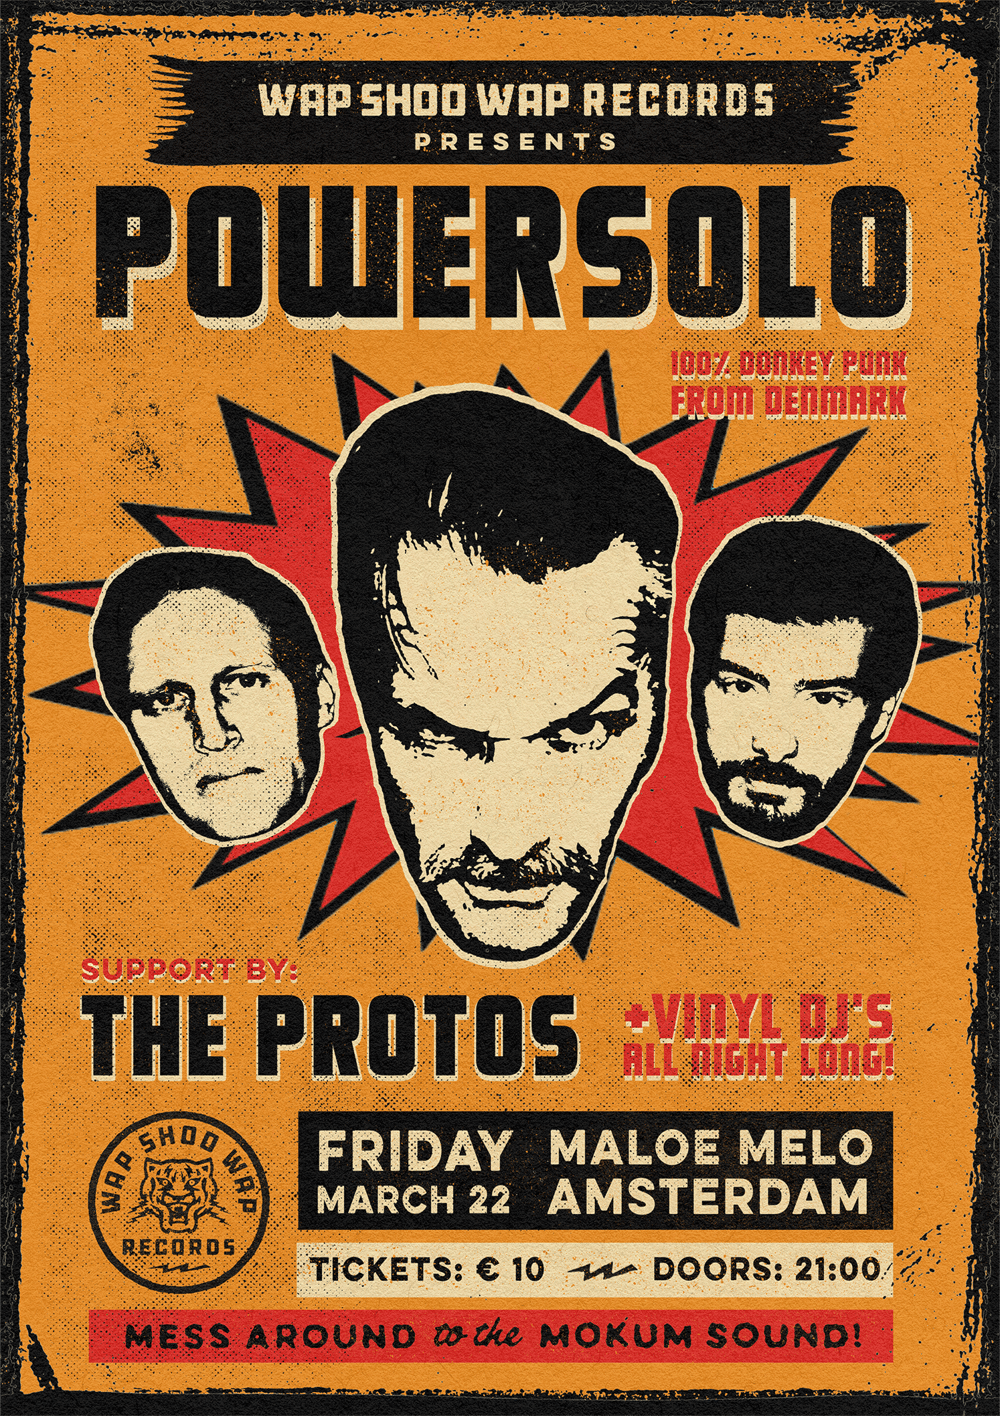 Tickets for Powersolo + The Protos @ Maloe Melo - Friday March 22, Amsterdam